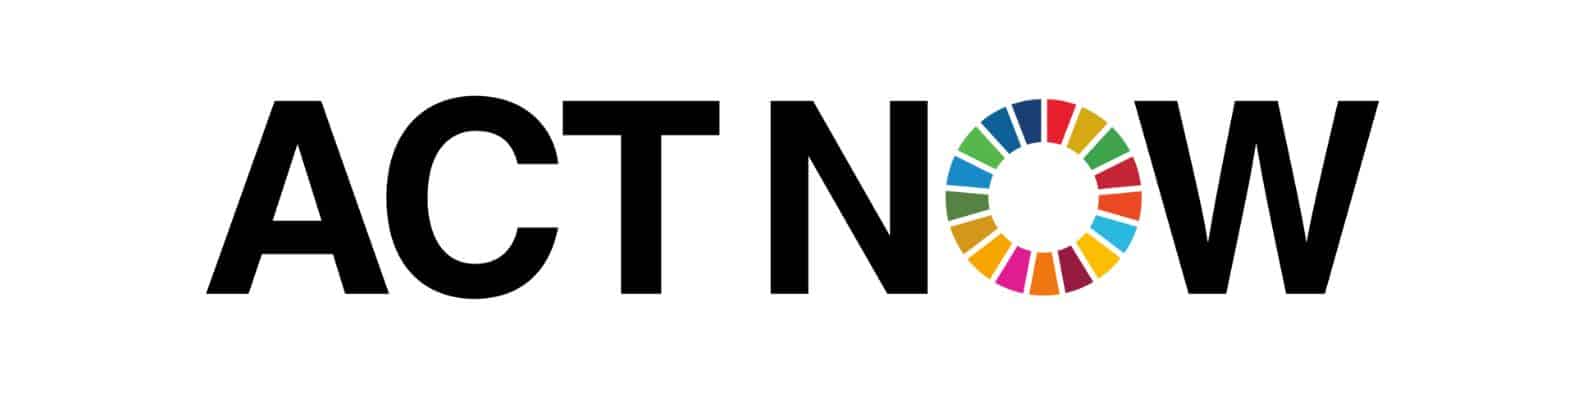 The UN's Act Now logo calling on all individuals to make a difference using circle of colors in overall SDG logo